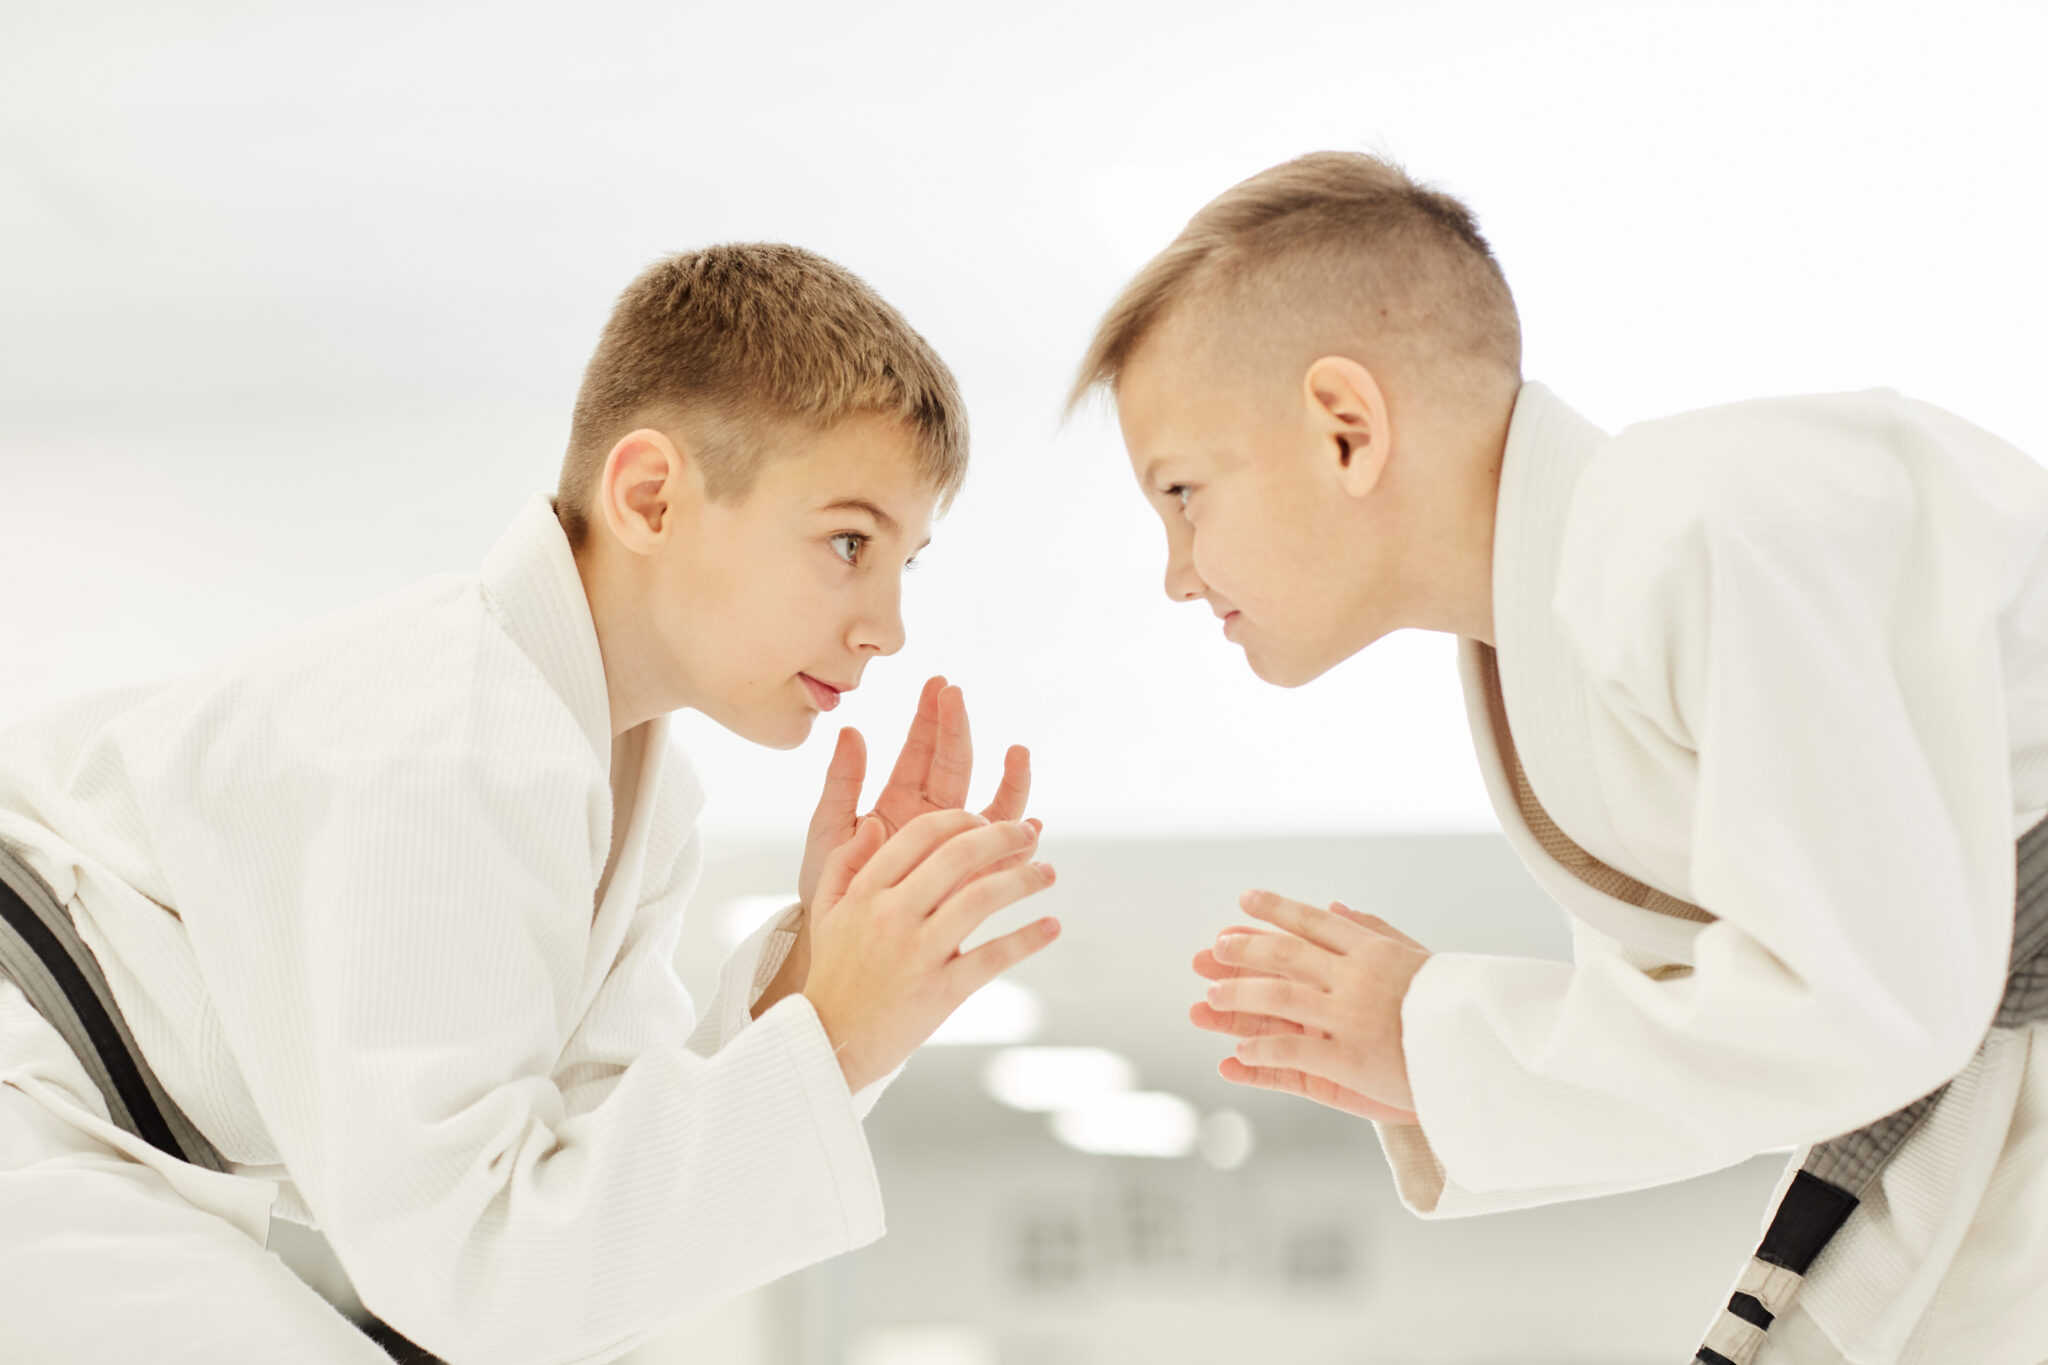 two boys fighting competition